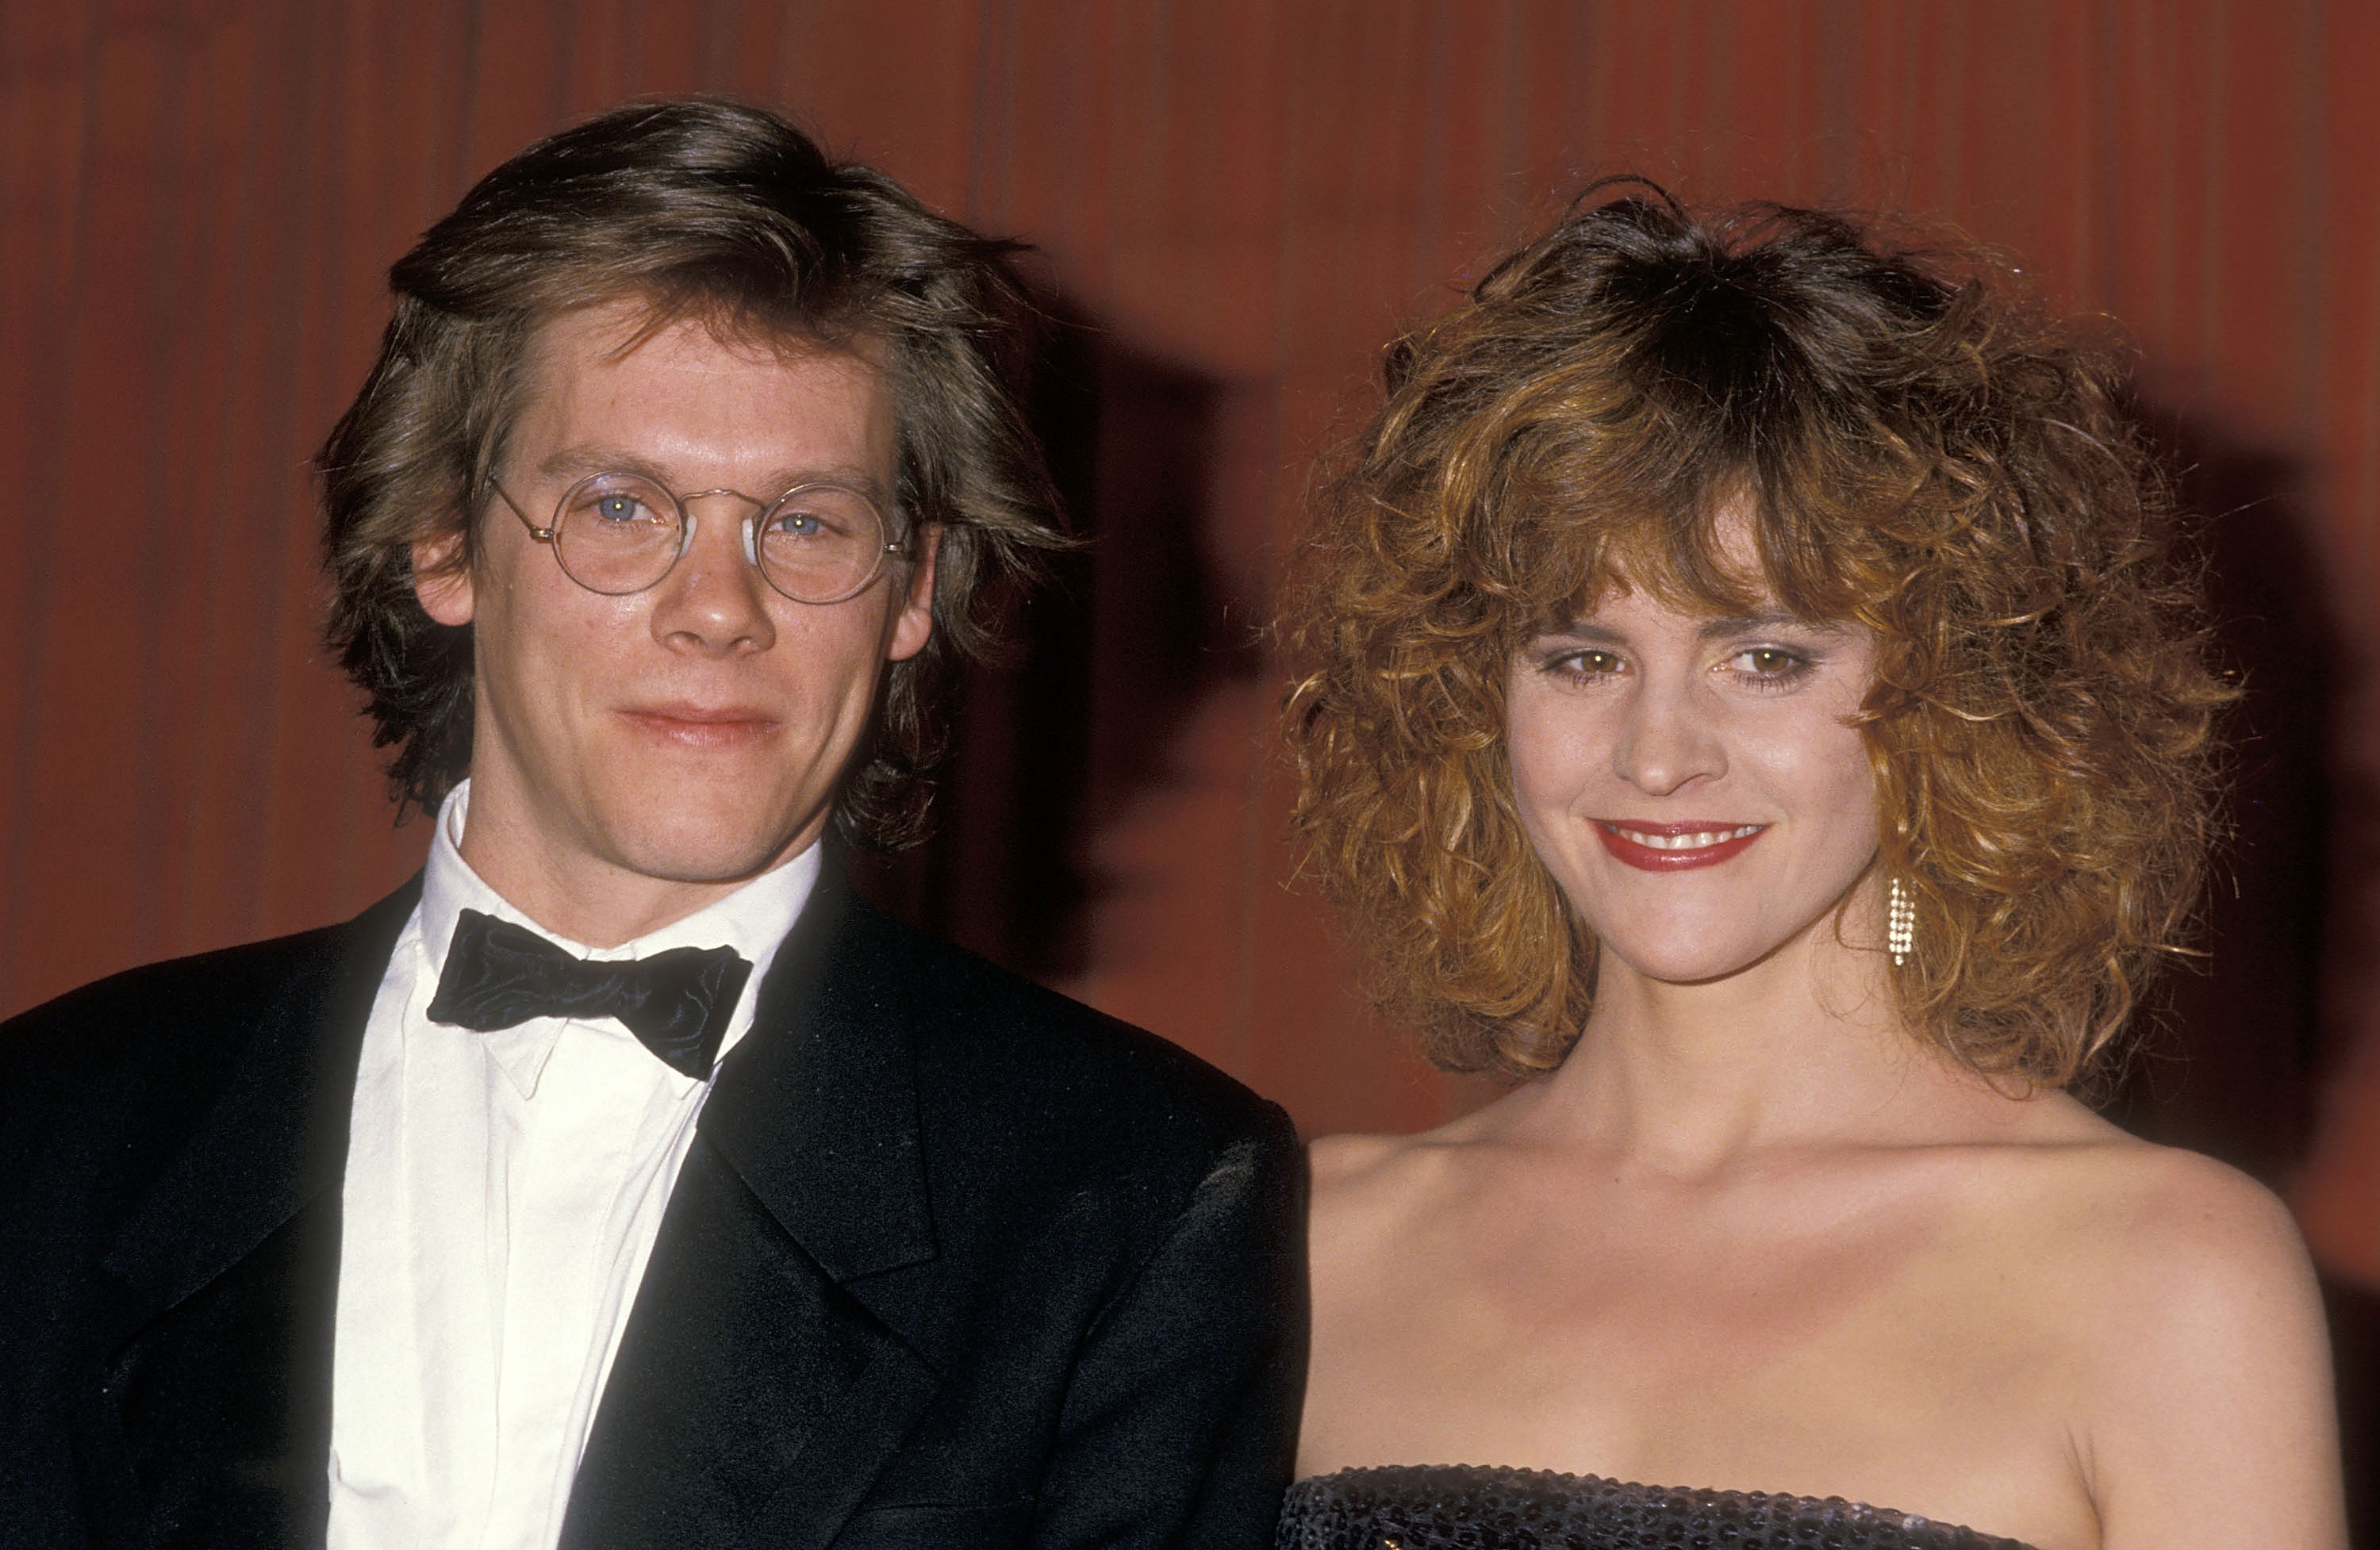 Kevin Bacon and Kyra Sedgwick on January 23, 1988 at the Beverly Hilton Hotel in Beverly Hills, California. | Source: Getty Images